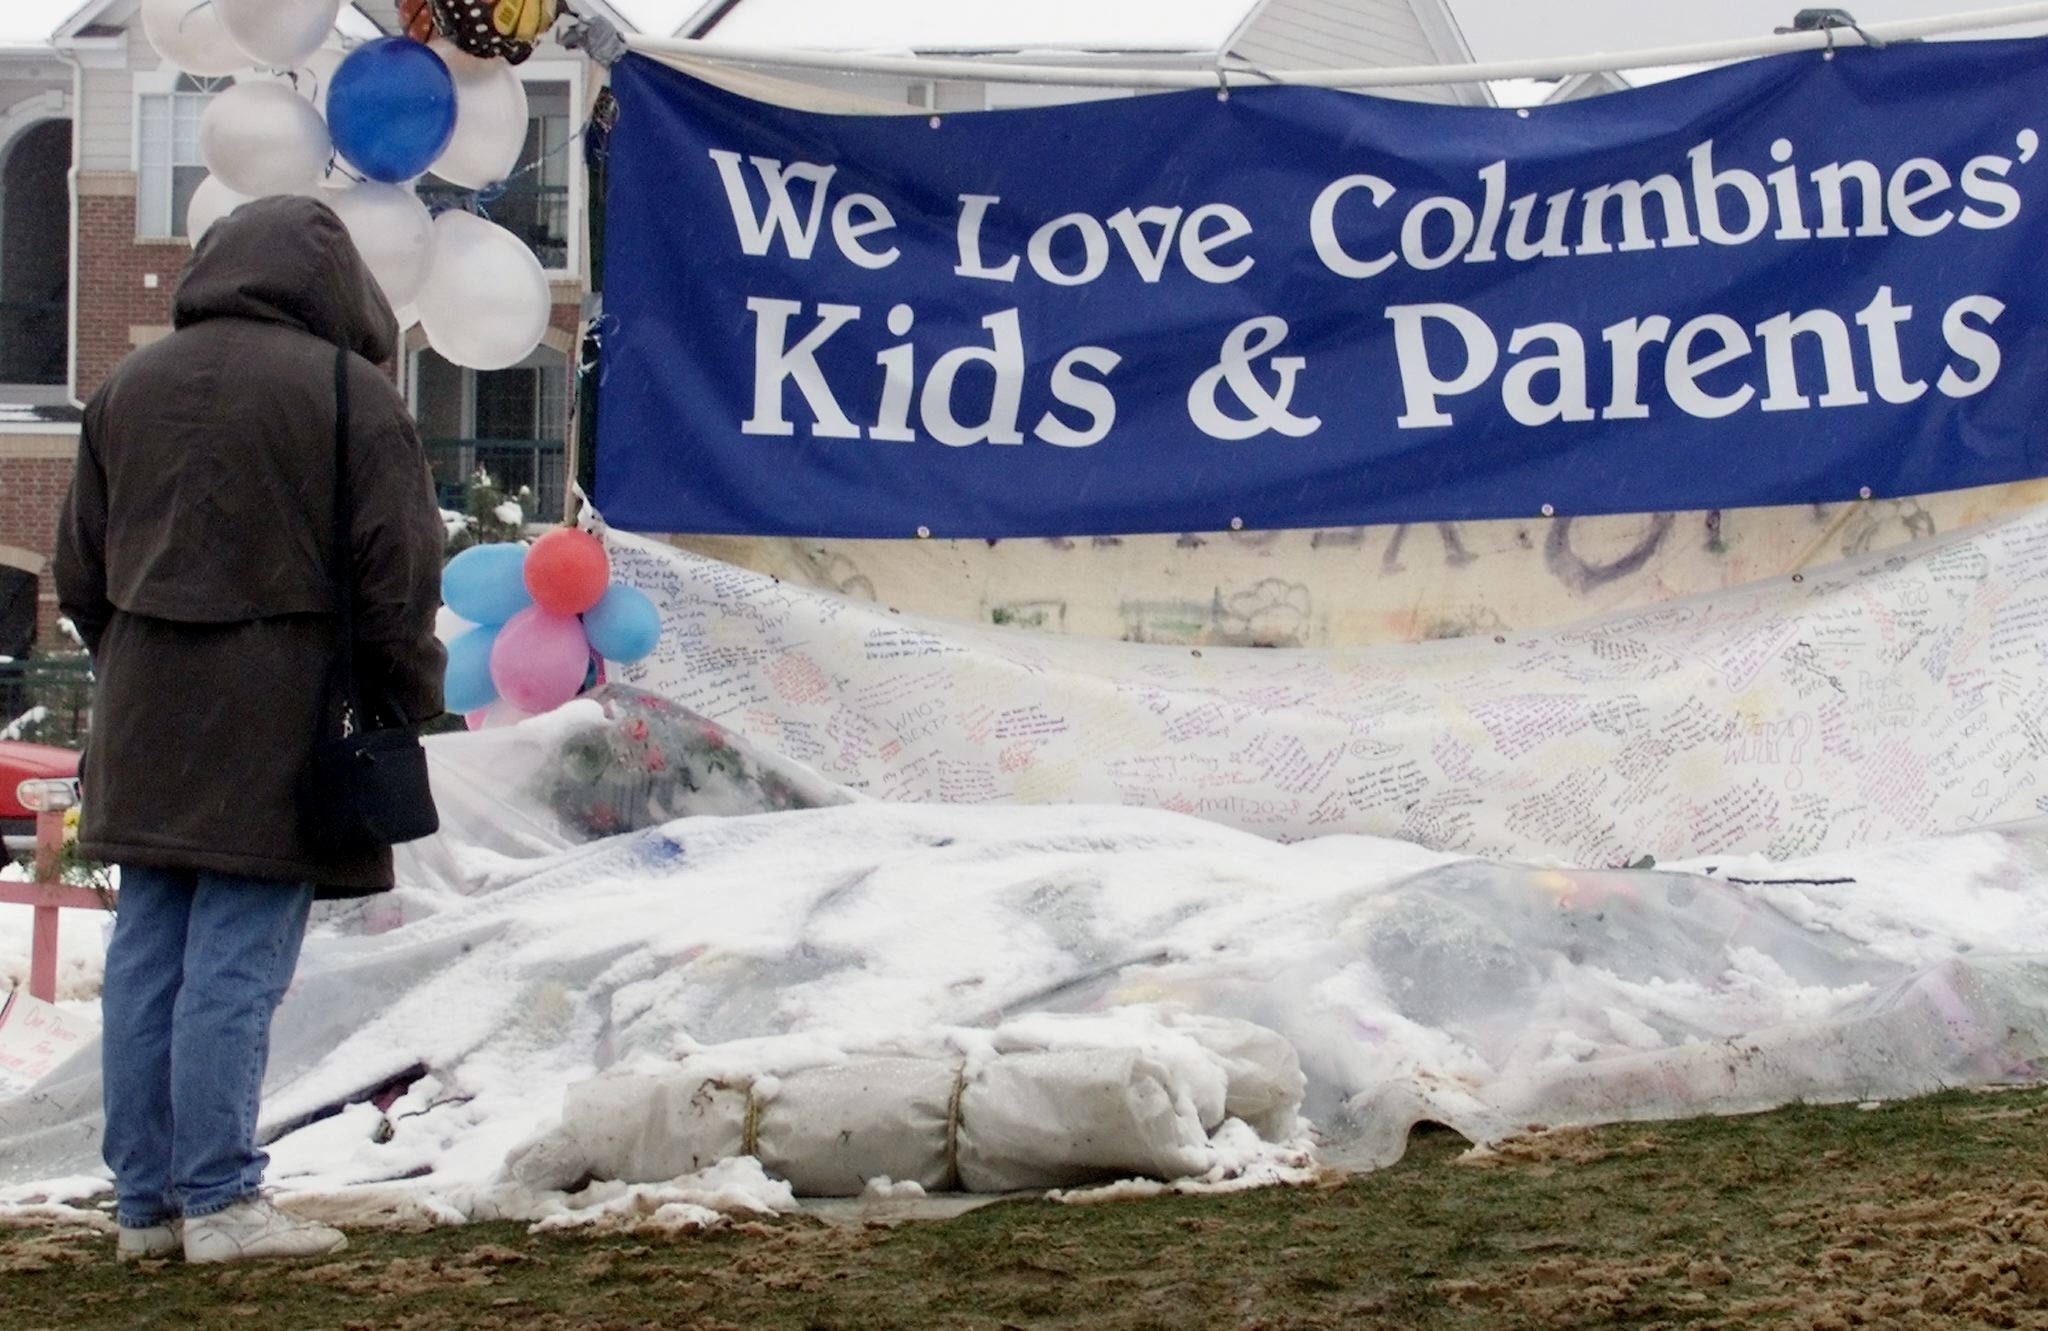 large banner for the lives lost reading we love columbines kids and parents